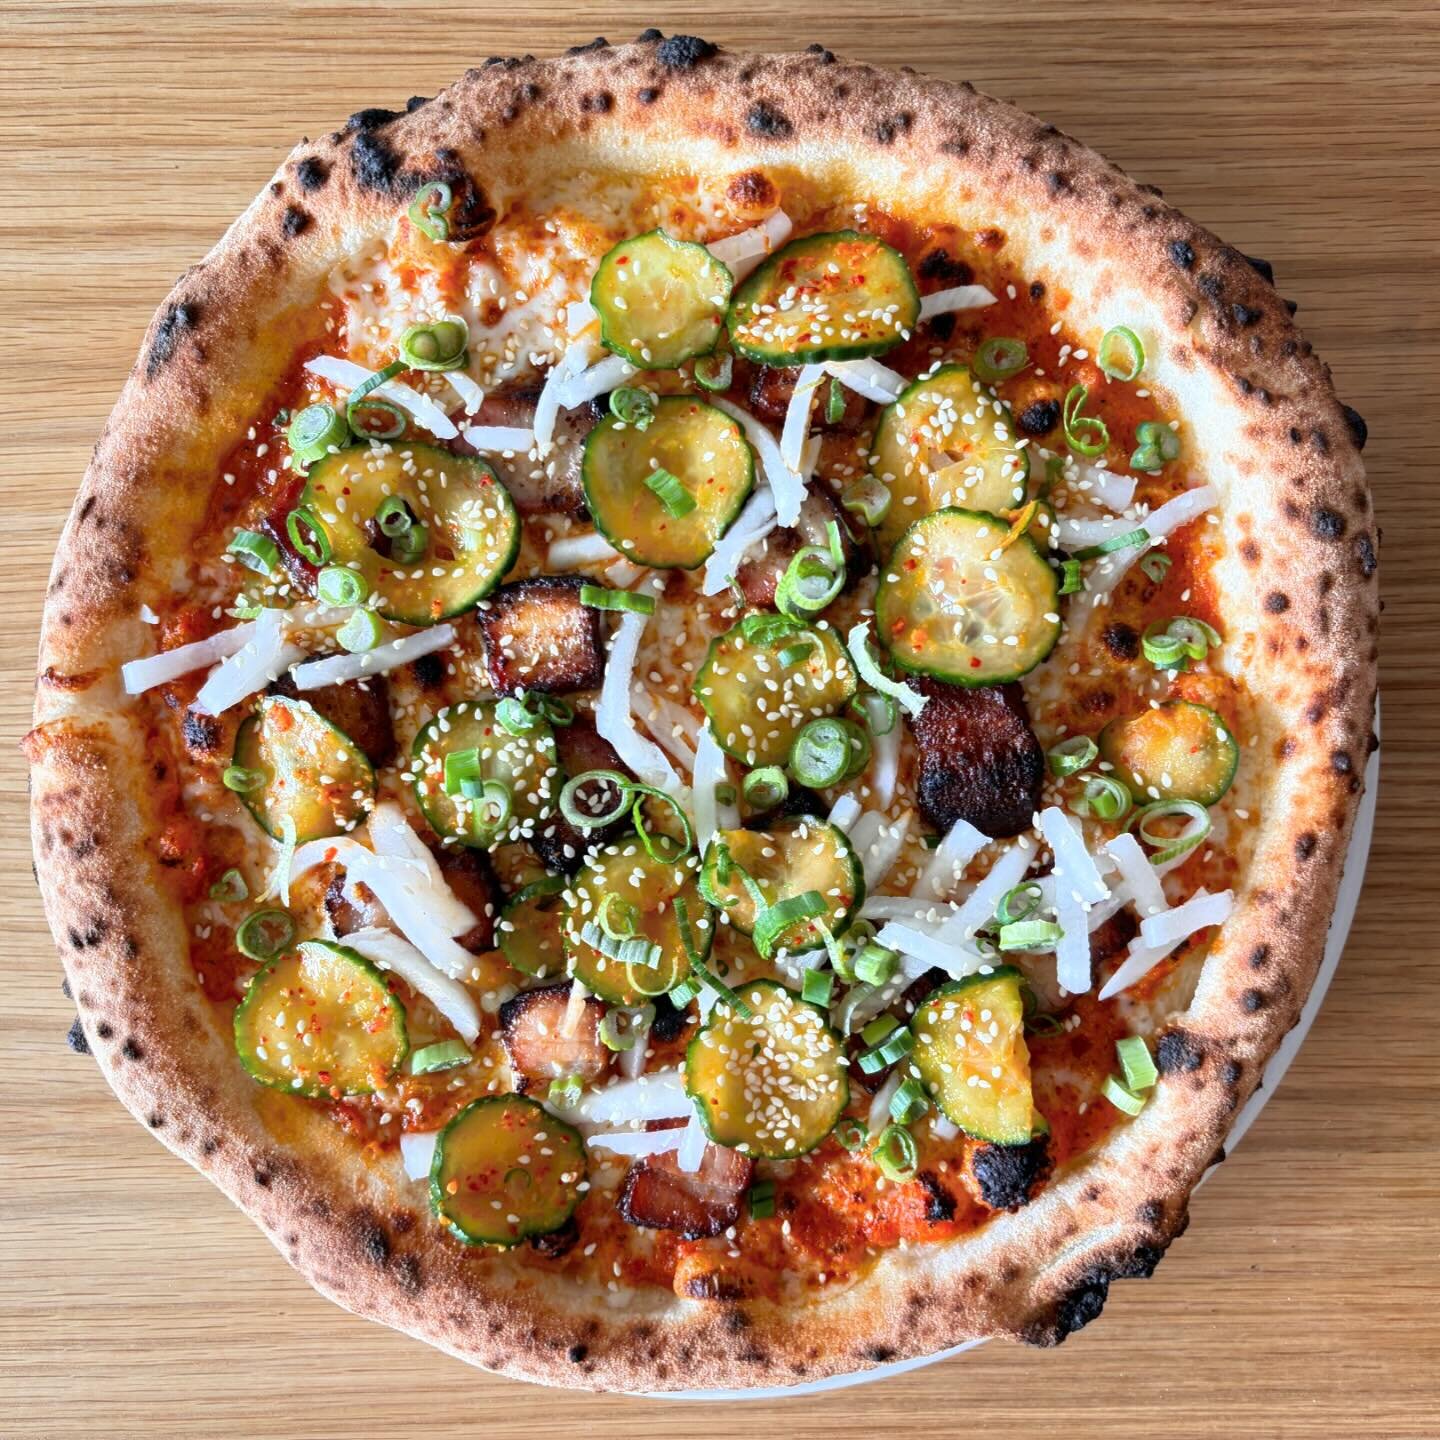 Introducing our newest // Korean BBQ Pizza

Gochujang Romesco sauce, mozz, smoked gochujang pork belly, pickled radish, Korean marinated spicy cucumbers, green onions, and toasted sesame seeds

The perfect blend of smokey and sweet 👌🏽

Now availabl